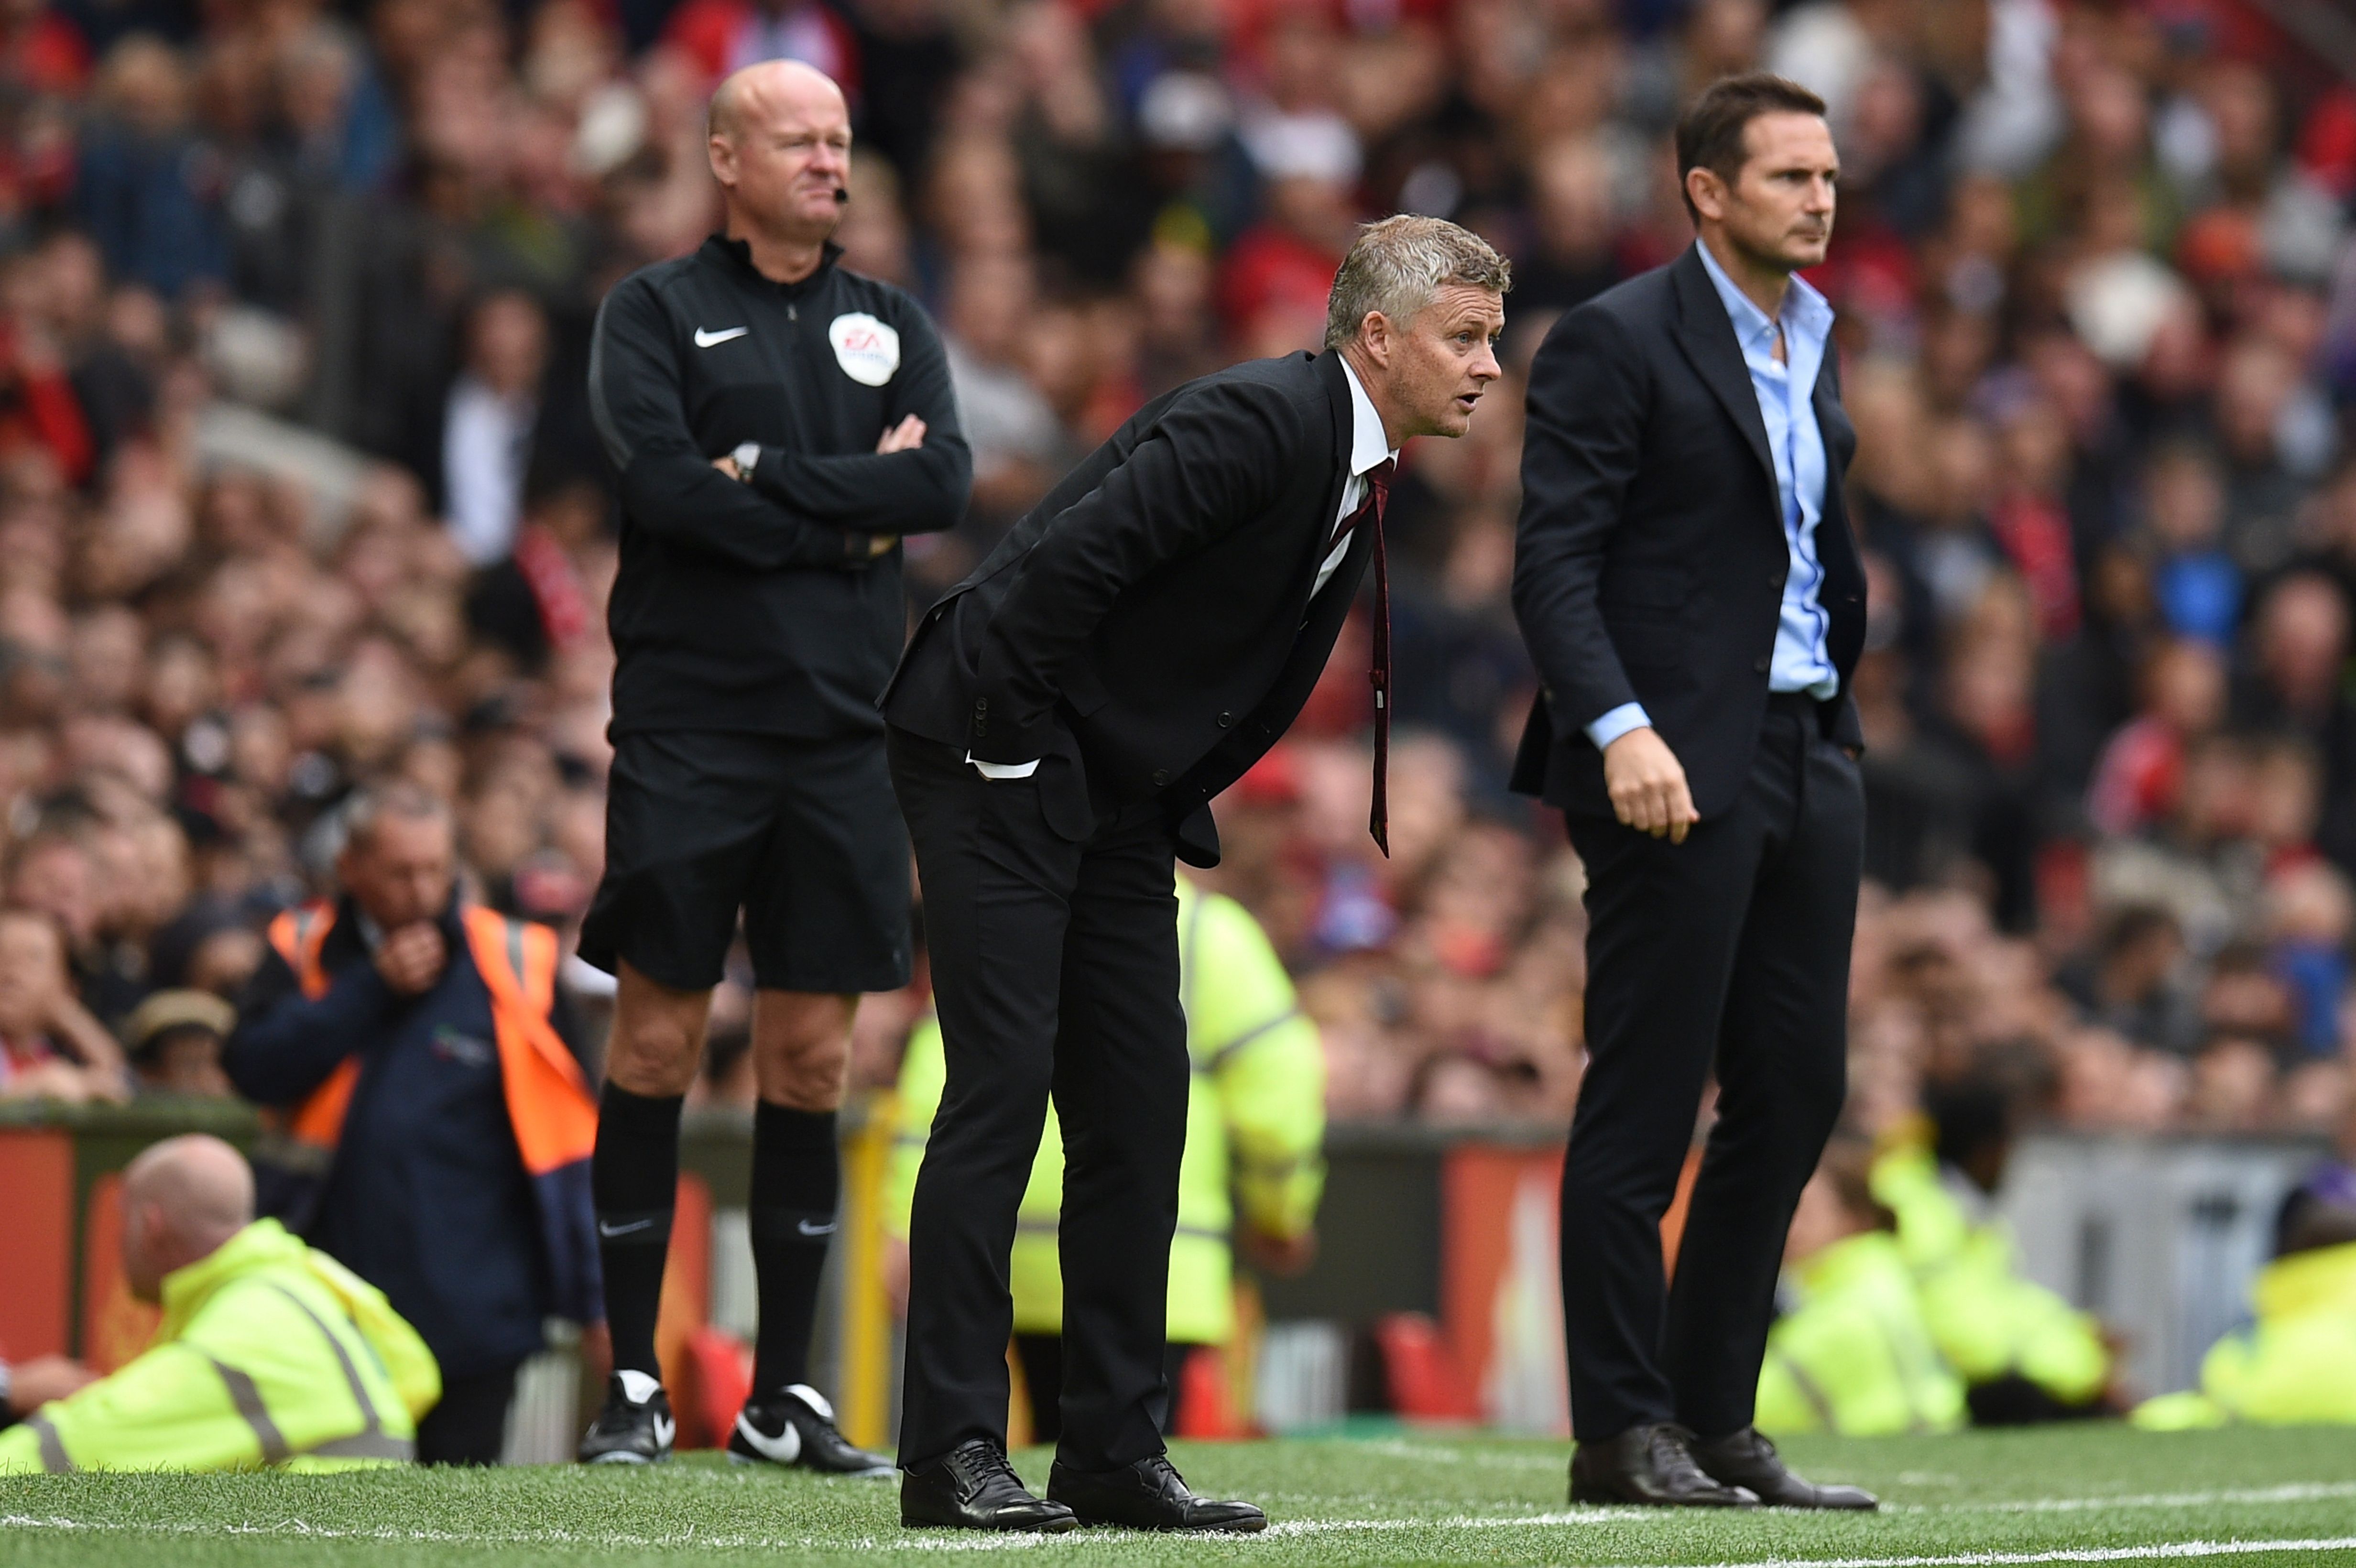 Manchester United's Norwegian manager Ole Gunnar Solskjaer (C) and Chelsea's English head coach Frank Lampard (R) look on during the English Premier League football match between Manchester United and Chelsea at Old Trafford in Manchester, north west England, on August 11, 2019. (Photo by Oli SCARFF / AFP) / RESTRICTED TO EDITORIAL USE. No use with unauthorized audio, video, data, fixture lists, club/league logos or 'live' services. Online in-match use limited to 120 images. An additional 40 images may be used in extra time. No video emulation. Social media in-match use limited to 120 images. An additional 40 images may be used in extra time. No use in betting publications, games or single club/league/player publications. /         (Photo credit should read OLI SCARFF/AFP via Getty Images)